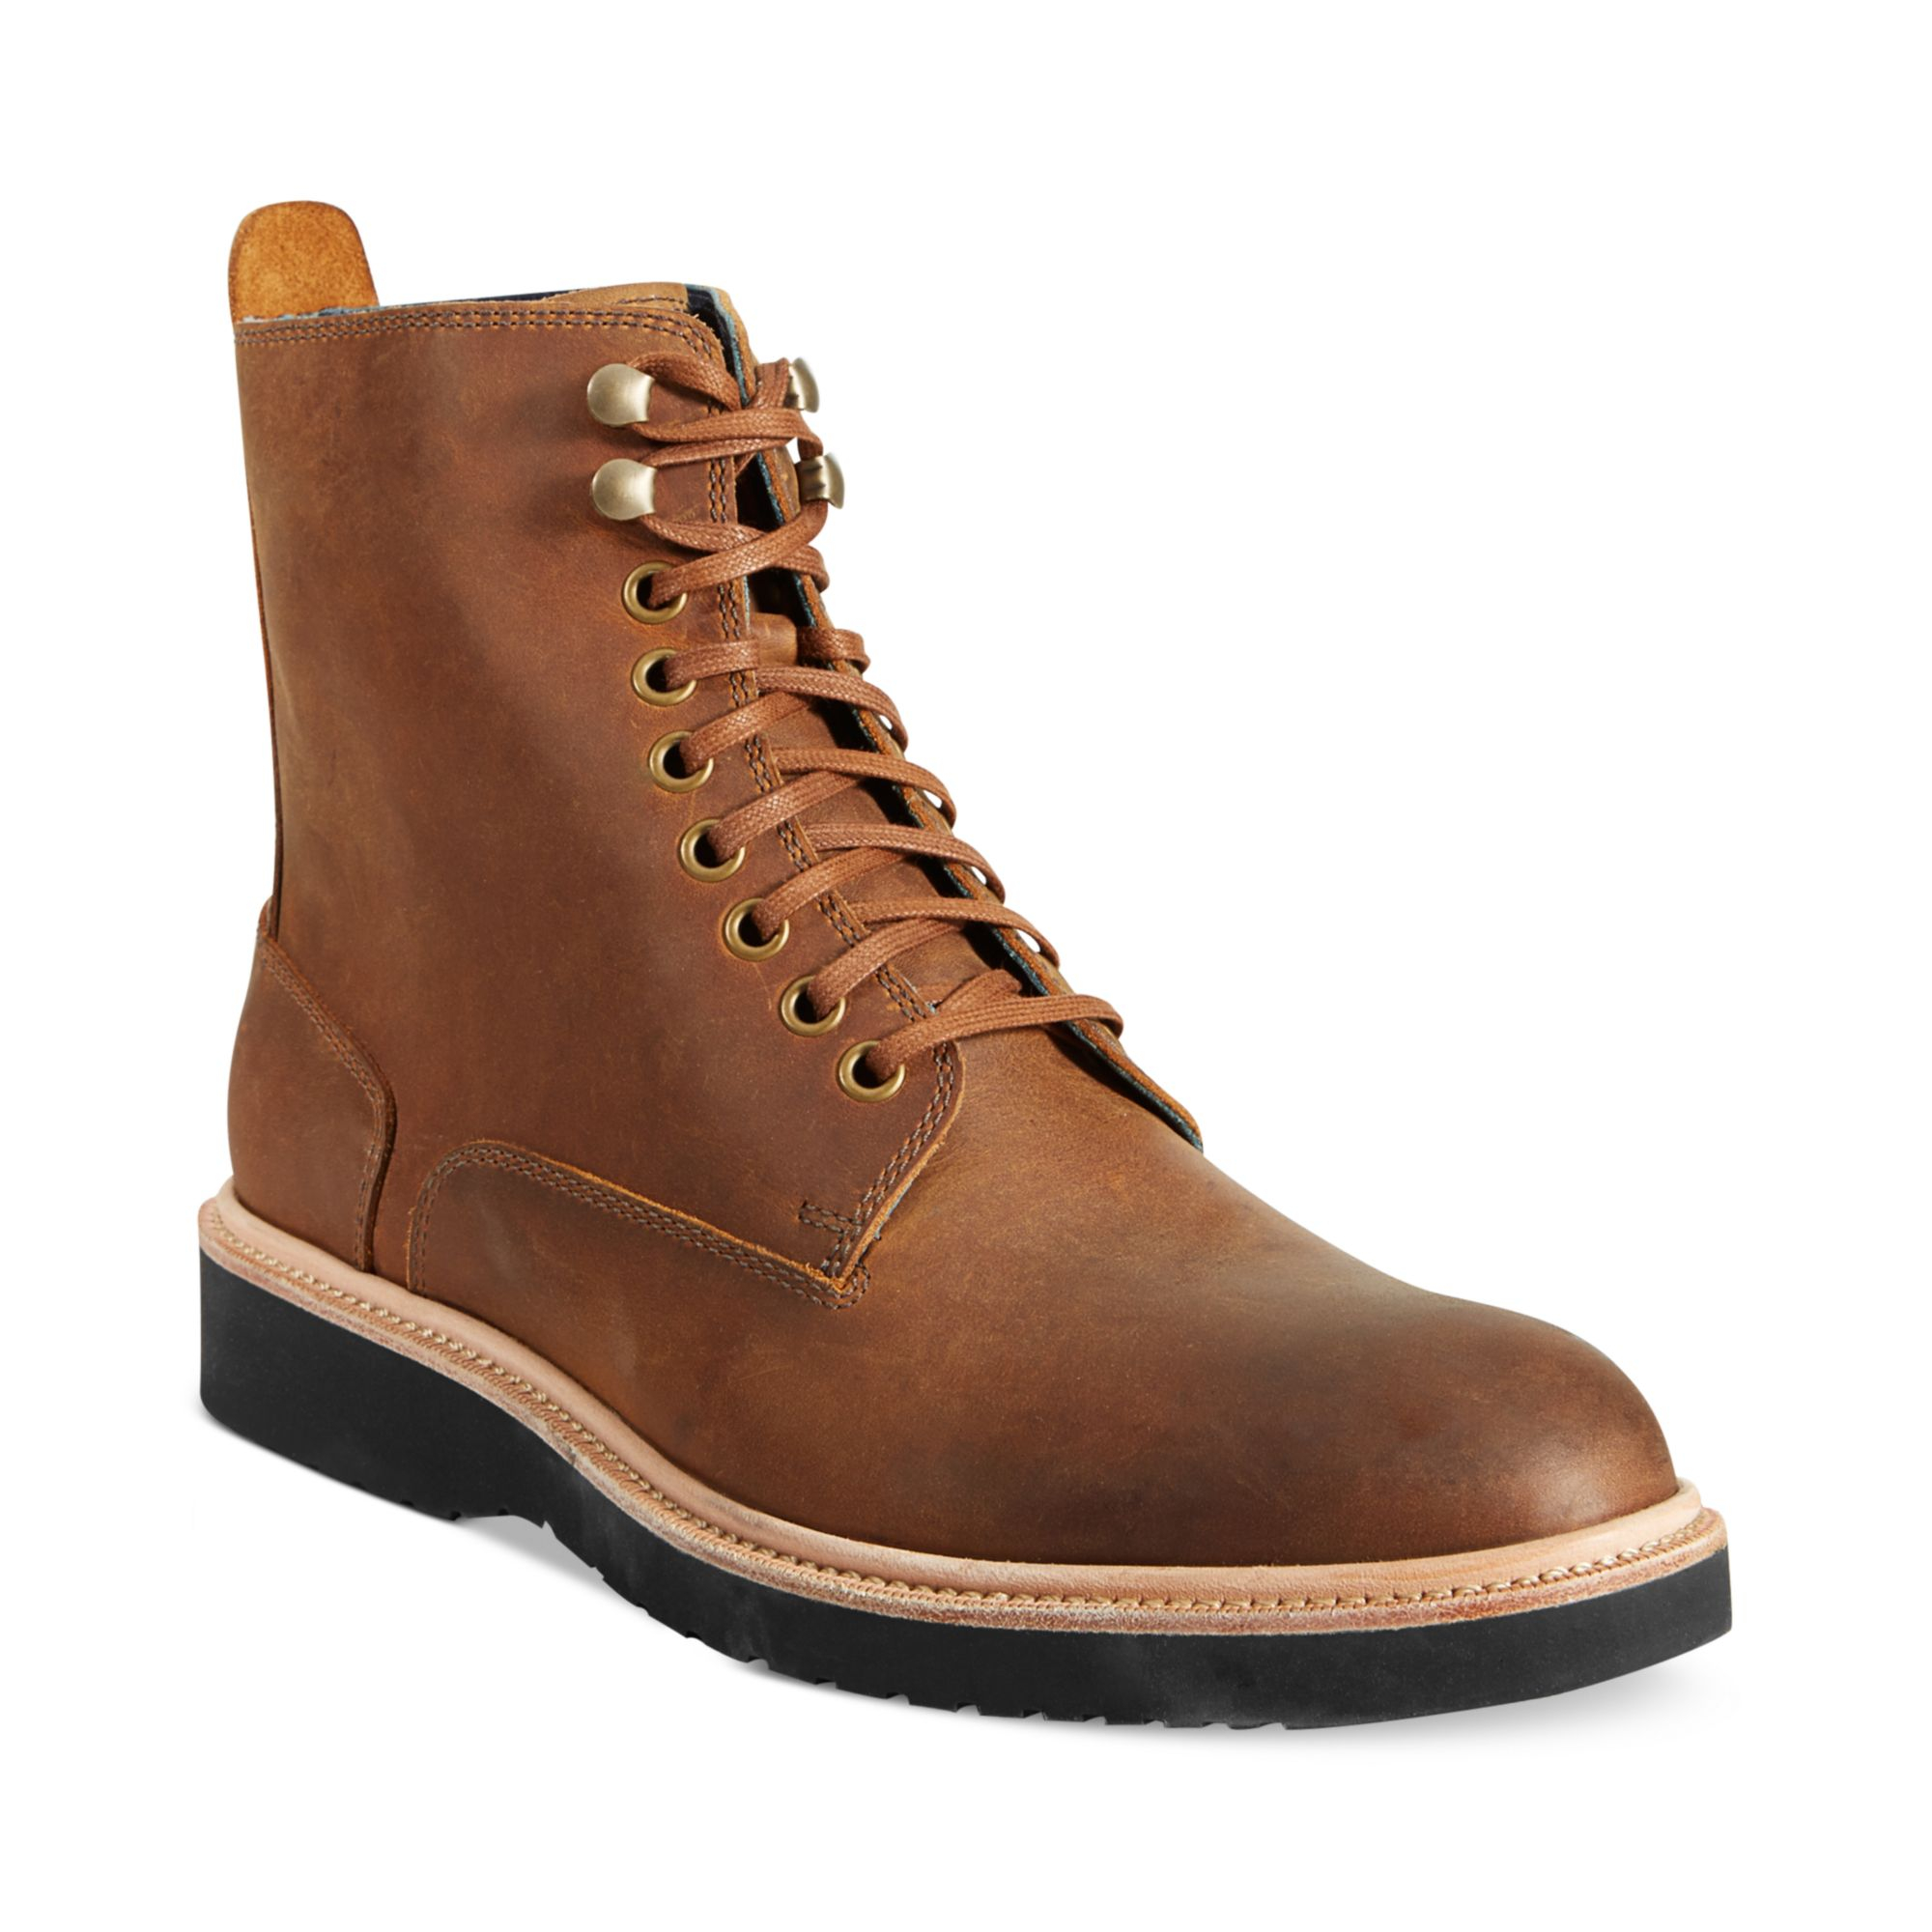 Cole Haan Martin Waterproof Wedge Lace Boots in Brown for Men - Lyst